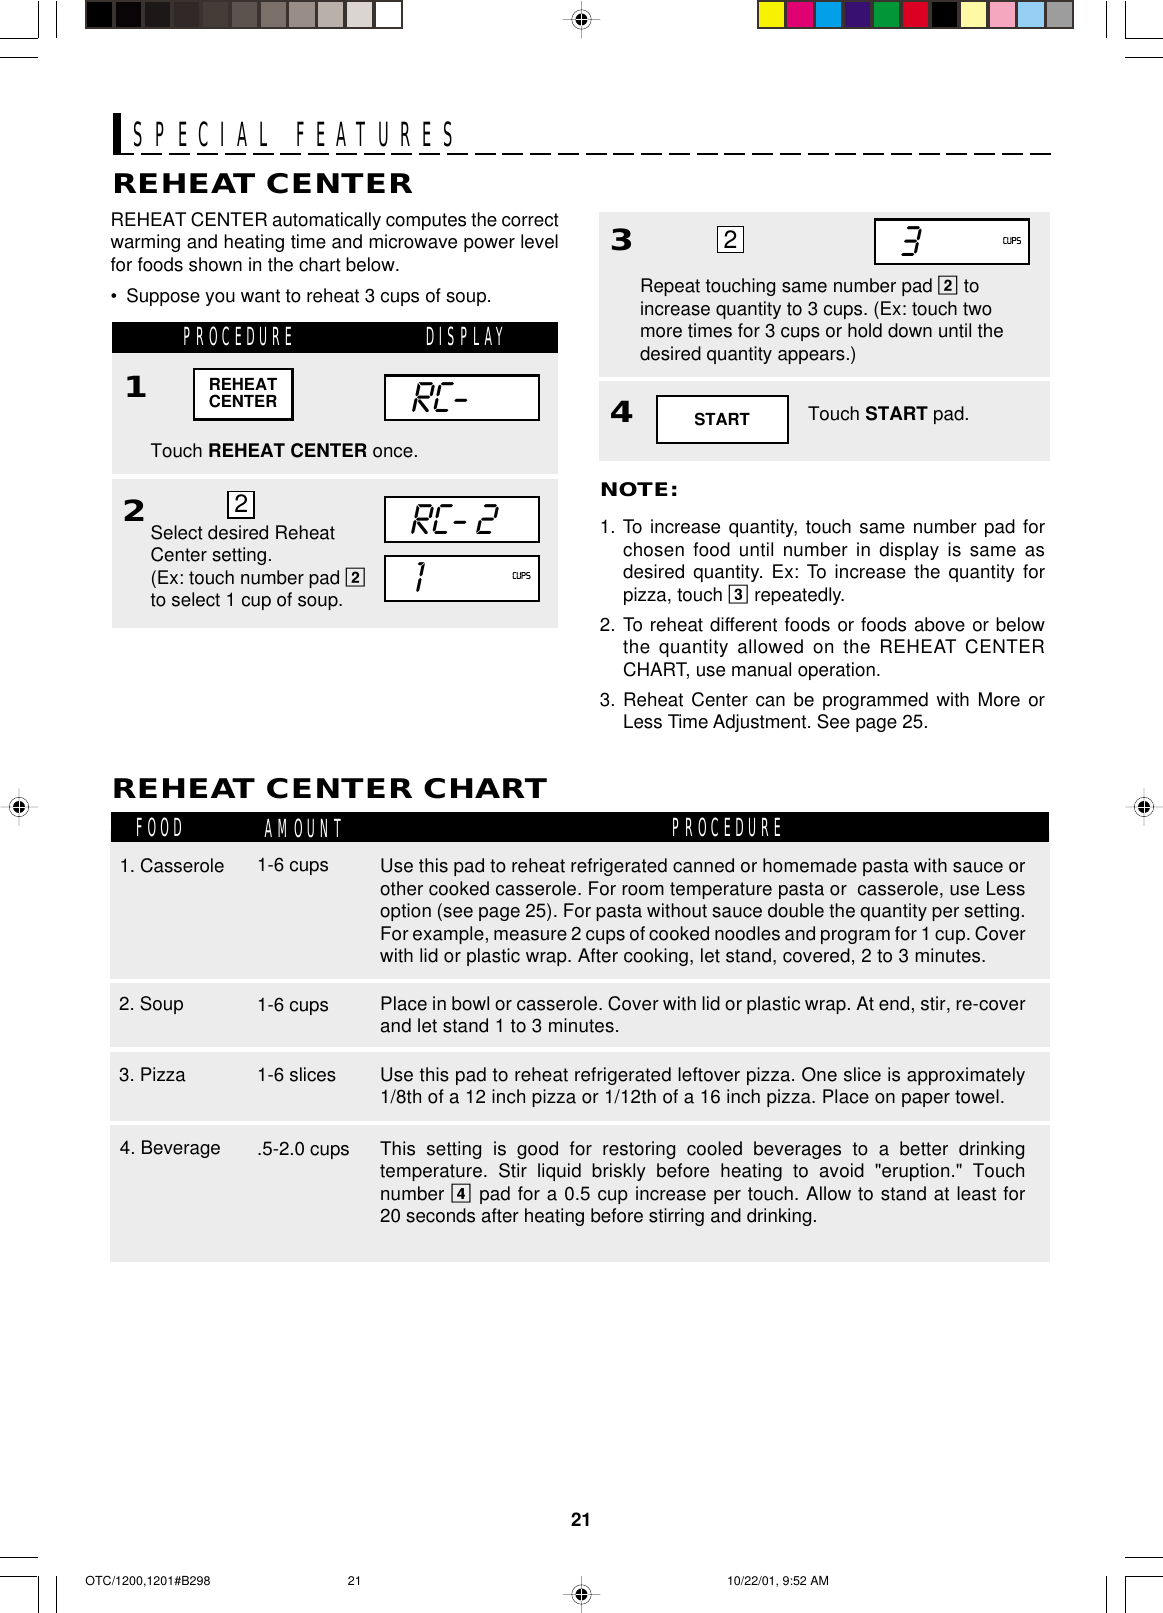 21SPECIAL FEATURESREHEAT CENTERREHEAT CENTER automatically computes the correctwarming and heating time and microwave power levelfor foods shown in the chart below.•Suppose you want to reheat 3 cups of soup.PROCEDURE1Touch REHEAT CENTER once.REHEAT CENTER CHARTFOOD AMOUNT PROCEDURE1. Casserole3. Pizza 1-6 slices1-6 cups2RC-RC- 21Select desired ReheatCenter setting.(Ex: touch number pad 2to select 1 cup of soup.4Touch START pad.NOTE:1. To increase quantity, touch same number pad forchosen food until number in display is same asdesired quantity. Ex: To increase the quantity forpizza, touch 3 repeatedly.2. To reheat different foods or foods above or belowthe quantity allowed on the REHEAT CENTERCHART, use manual operation.3. Reheat Center can be programmed with More orLess Time Adjustment. See page 25.CUPS2REHEATCENTER4. Beverage .5-2.0 cups33Repeat touching same number pad 2 toincrease quantity to 3 cups. (Ex: touch twomore times for 3 cups or hold down until thedesired quantity appears.)CUPS22. Soup 1-6 cupsSTARTDISPLAYUse this pad to reheat refrigerated leftover pizza. One slice is approximately1/8th of a 12 inch pizza or 1/12th of a 16 inch pizza. Place on paper towel.Use this pad to reheat refrigerated canned or homemade pasta with sauce orother cooked casserole. For room temperature pasta or  casserole, use Lessoption (see page 25). For pasta without sauce double the quantity per setting.For example, measure 2 cups of cooked noodles and program for 1 cup. Coverwith lid or plastic wrap. After cooking, let stand, covered, 2 to 3 minutes.This setting is good for restoring cooled beverages to a better drinkingtemperature. Stir liquid briskly before heating to avoid &quot;eruption.&quot; Touchnumber 4 pad for a 0.5 cup increase per touch. Allow to stand at least for20 seconds after heating before stirring and drinking.Place in bowl or casserole. Cover with lid or plastic wrap. At end, stir, re-coverand let stand 1 to 3 minutes.OTC/1200,1201#B298 10/22/01, 9:52 AM21